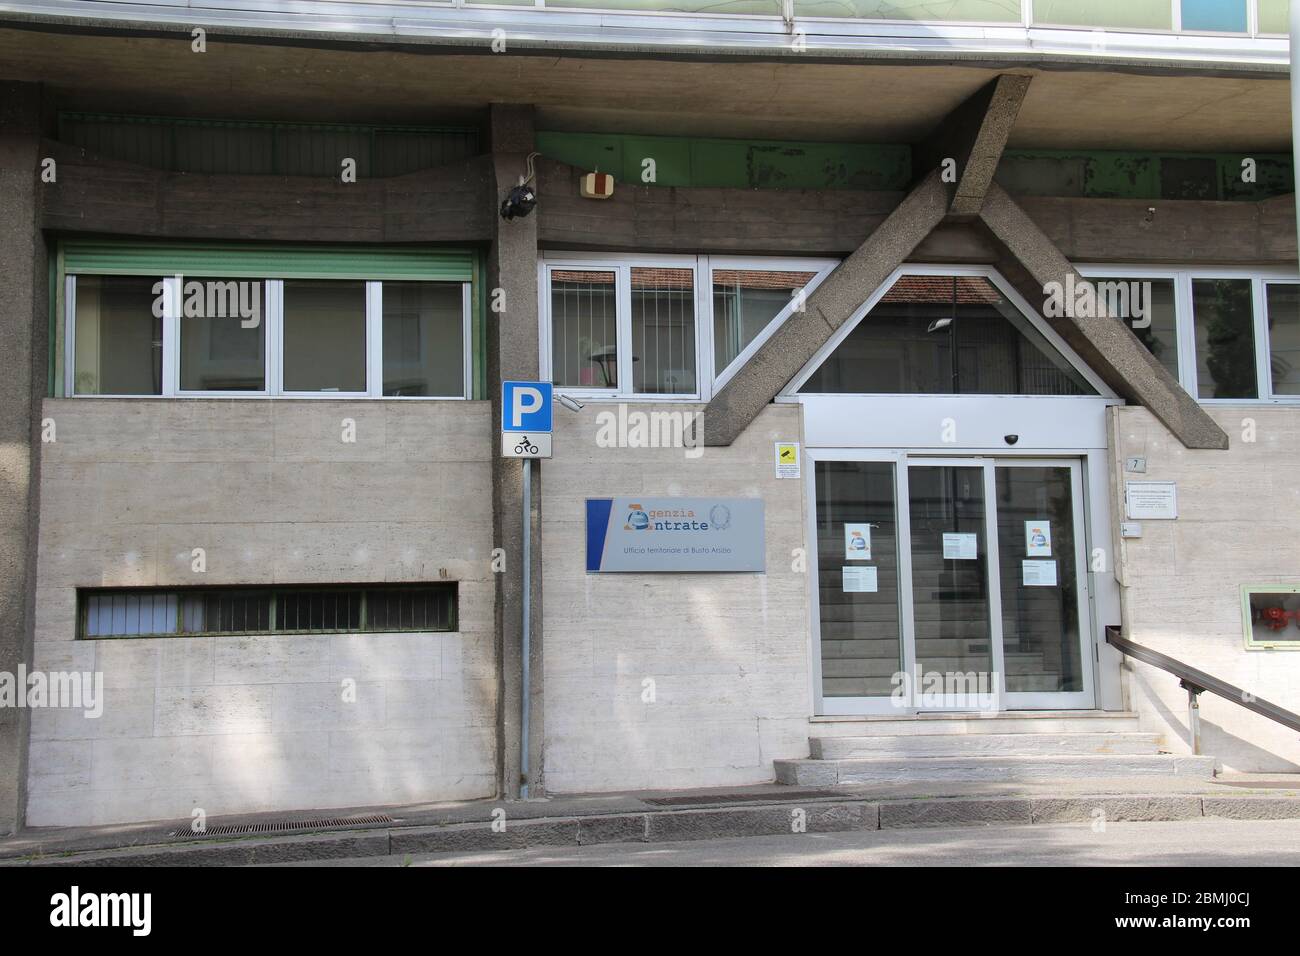 Busto Arsizio, Varese / Italy - 08 May 2020: Entrance of the Revenue Agency offices. Stock Photo